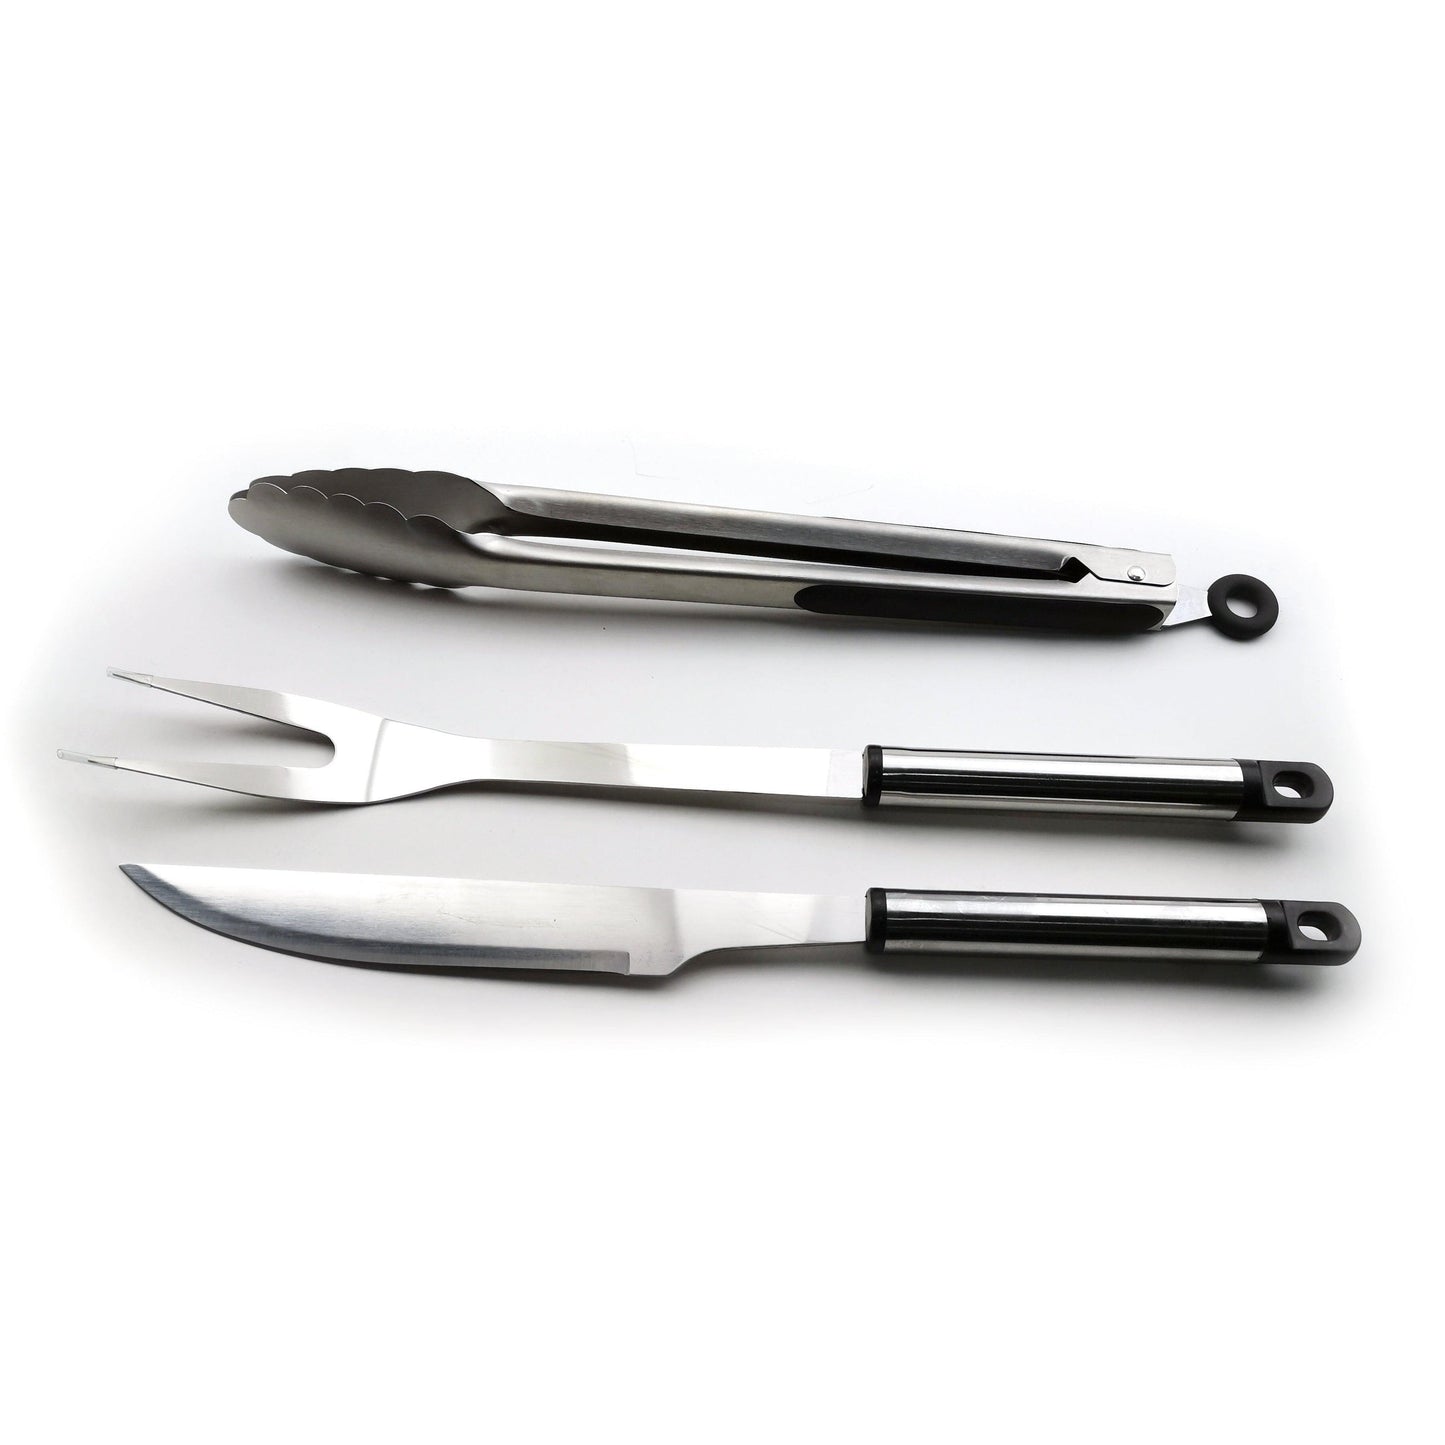 3PC BBQ TOOL SET - STAINLESS STEEL